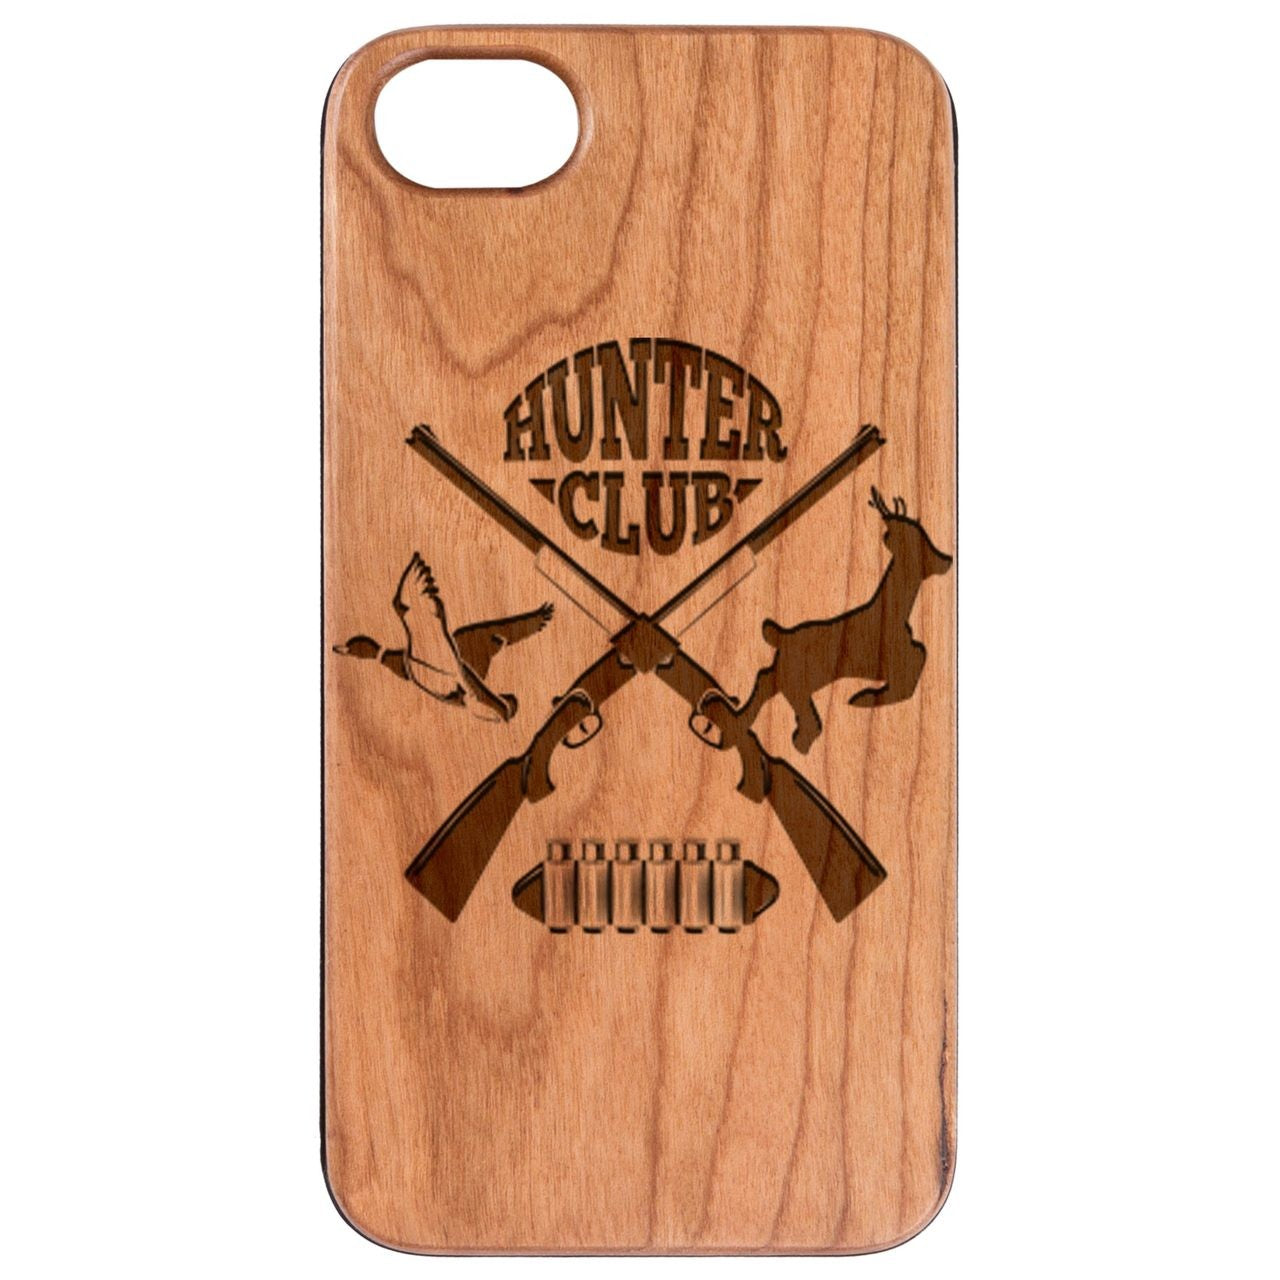  Hunter Club - Engraved - Wooden Phone Case - IPhone 13 Models